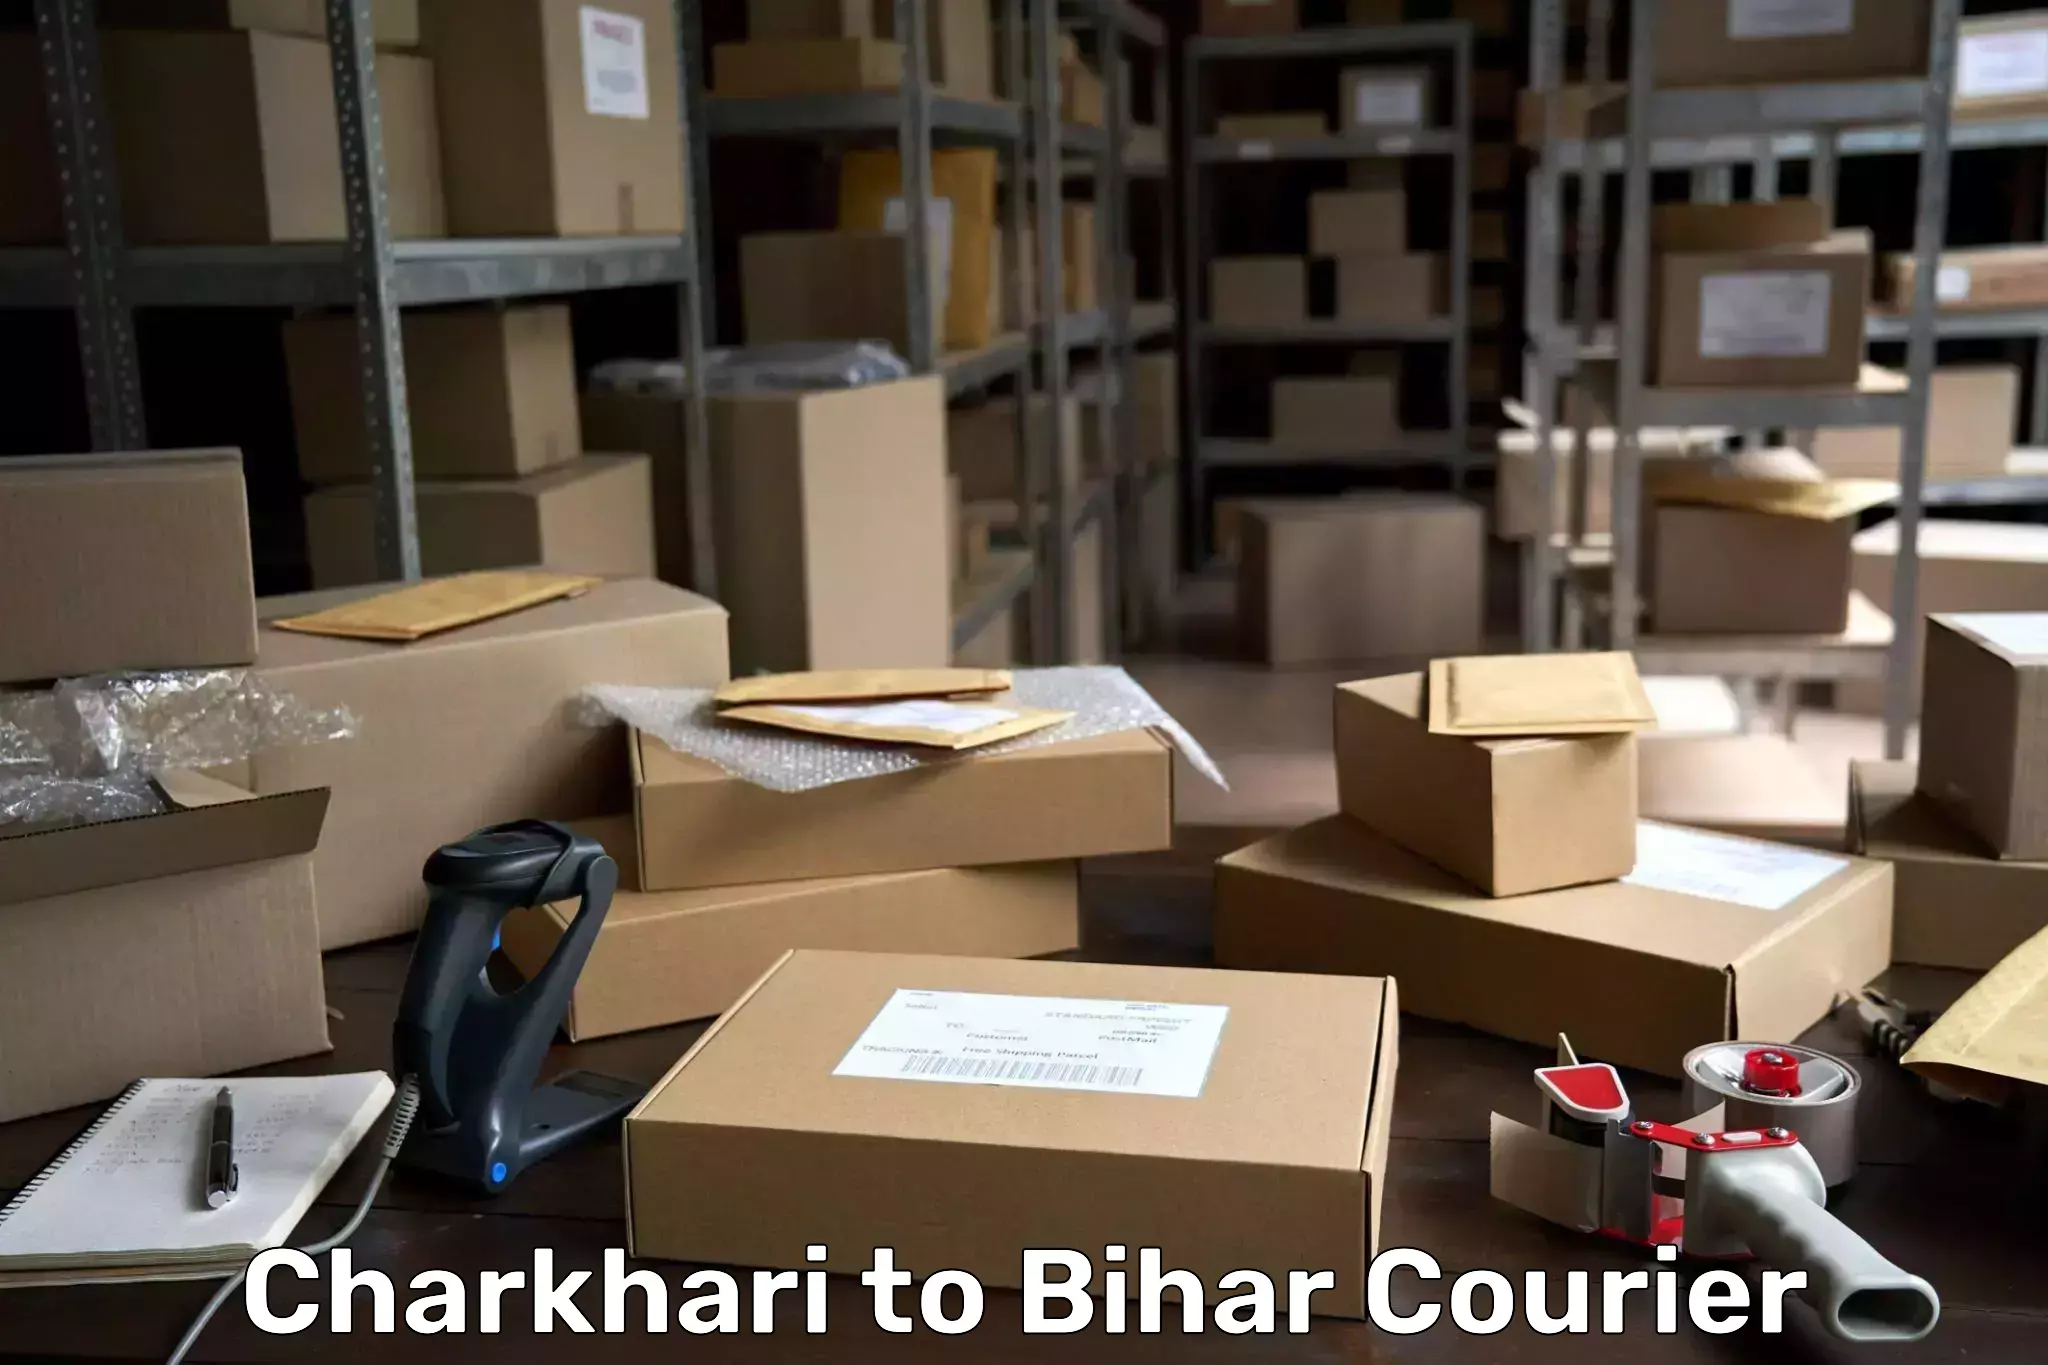 Global freight services Charkhari to Bhorey